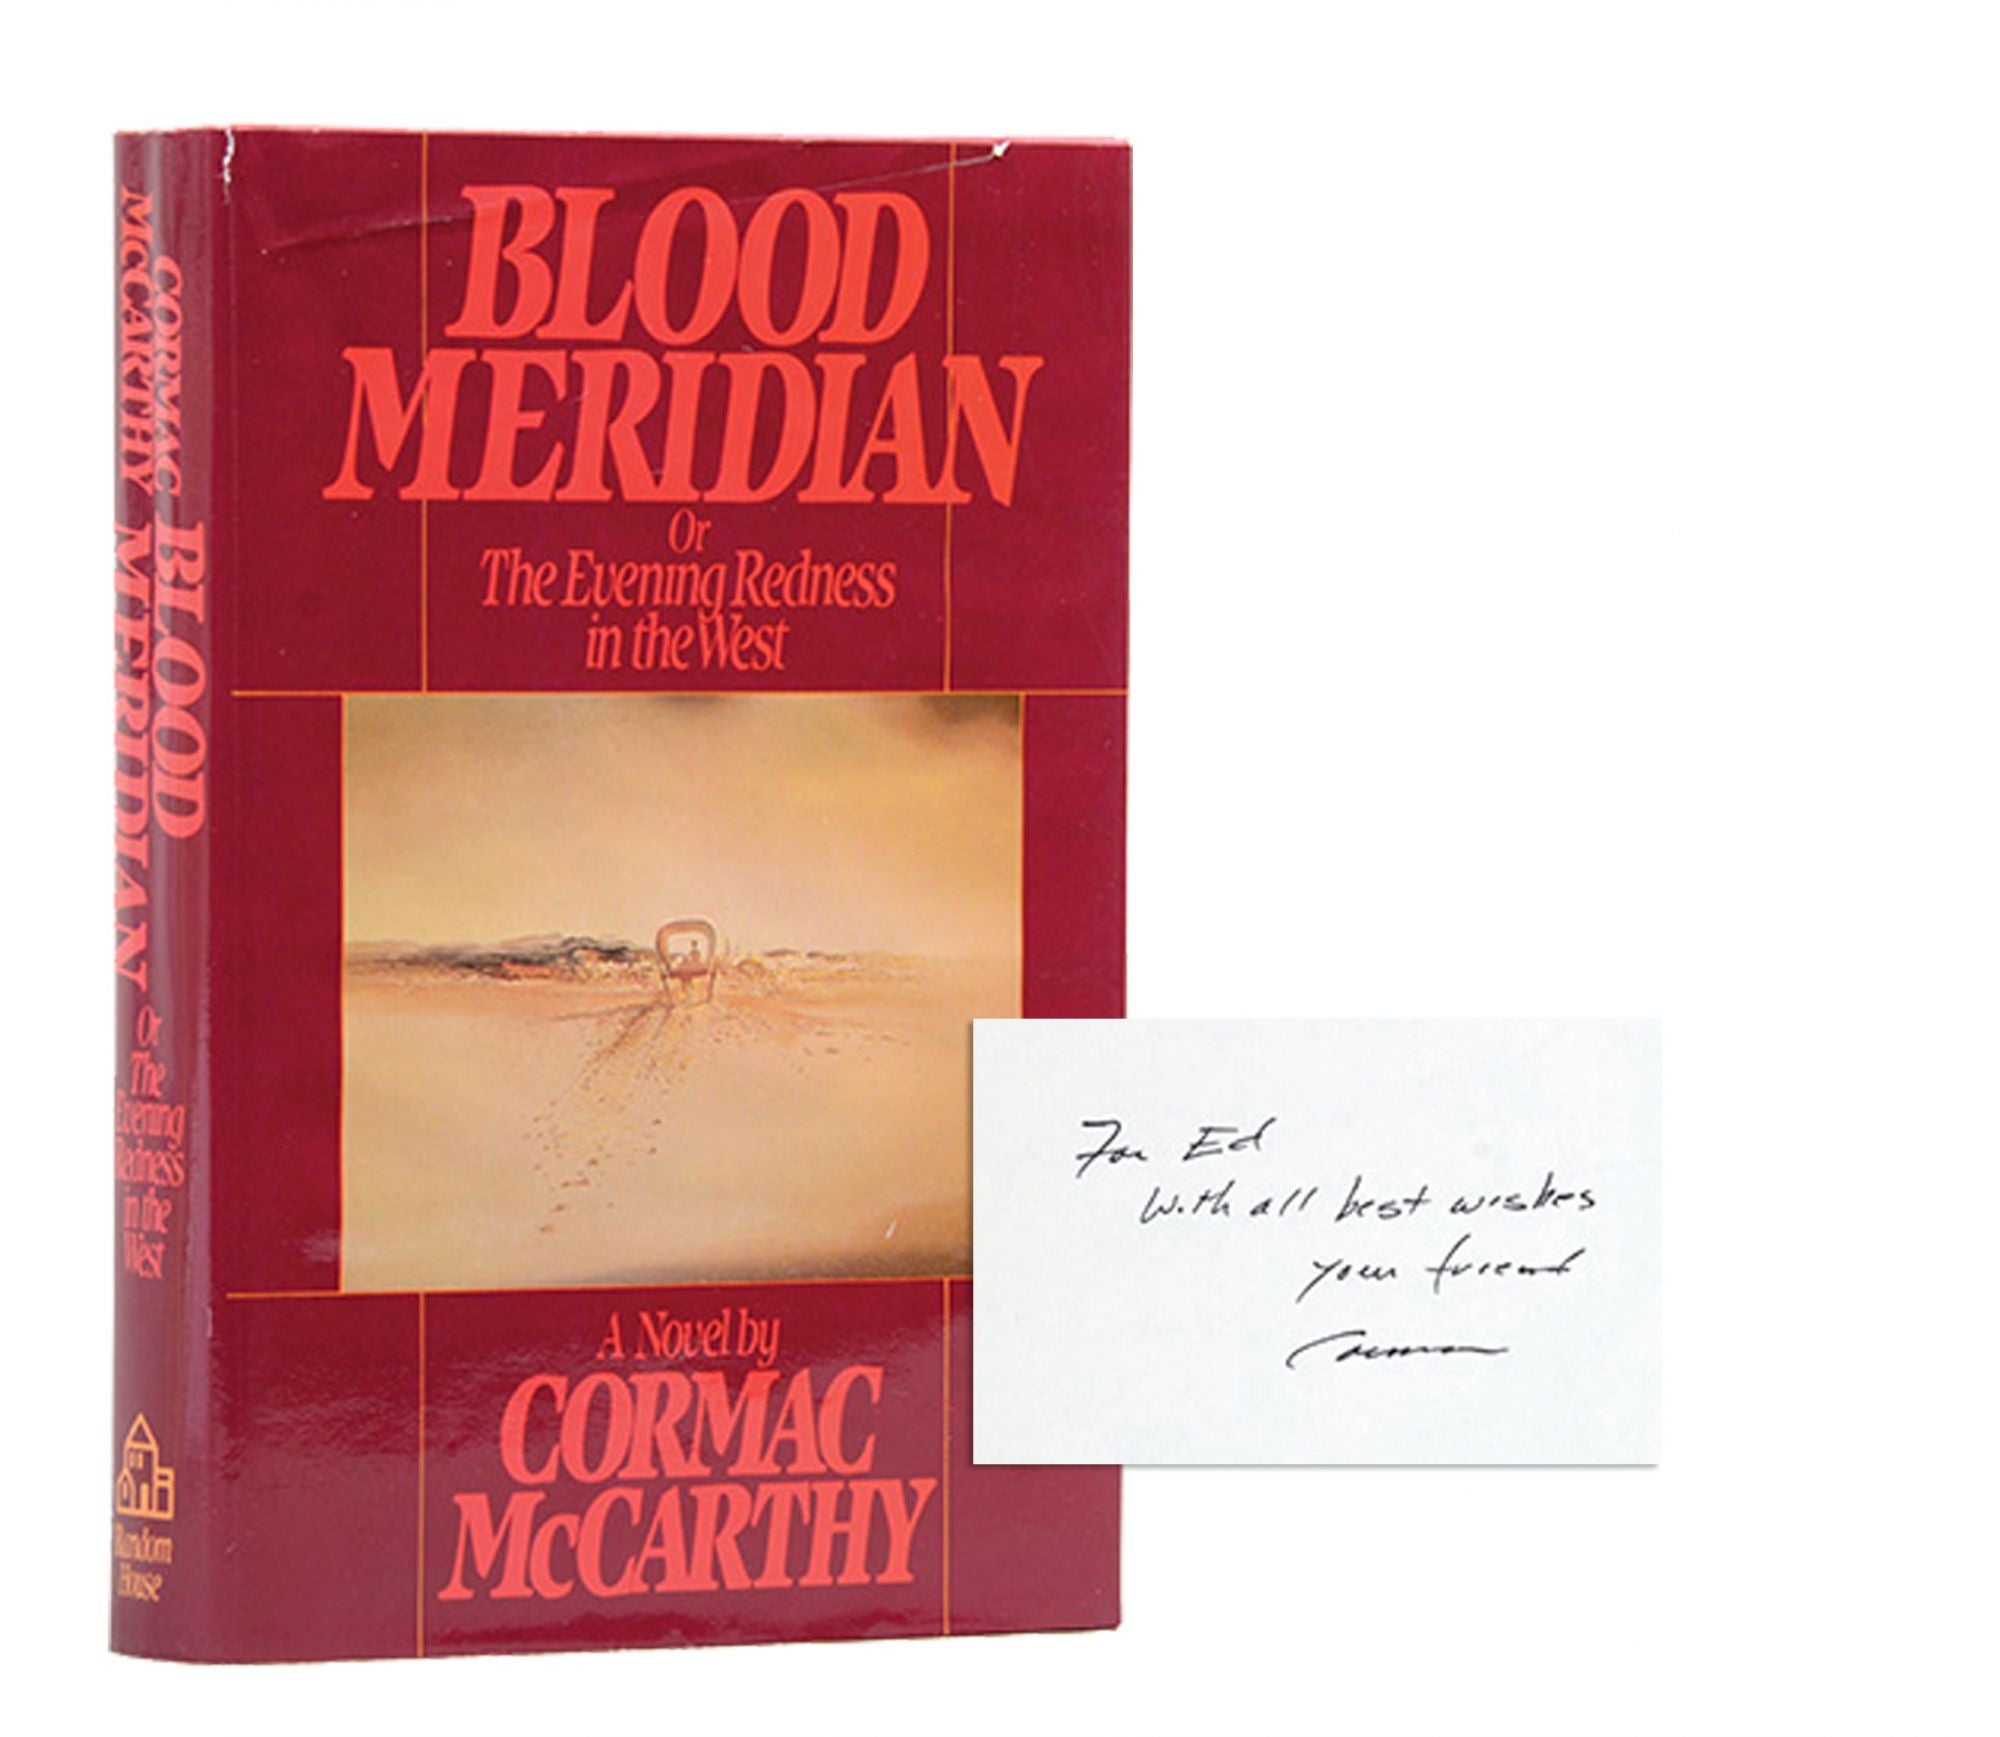 Blood Meridian or The Evening Redness in The West Presentation